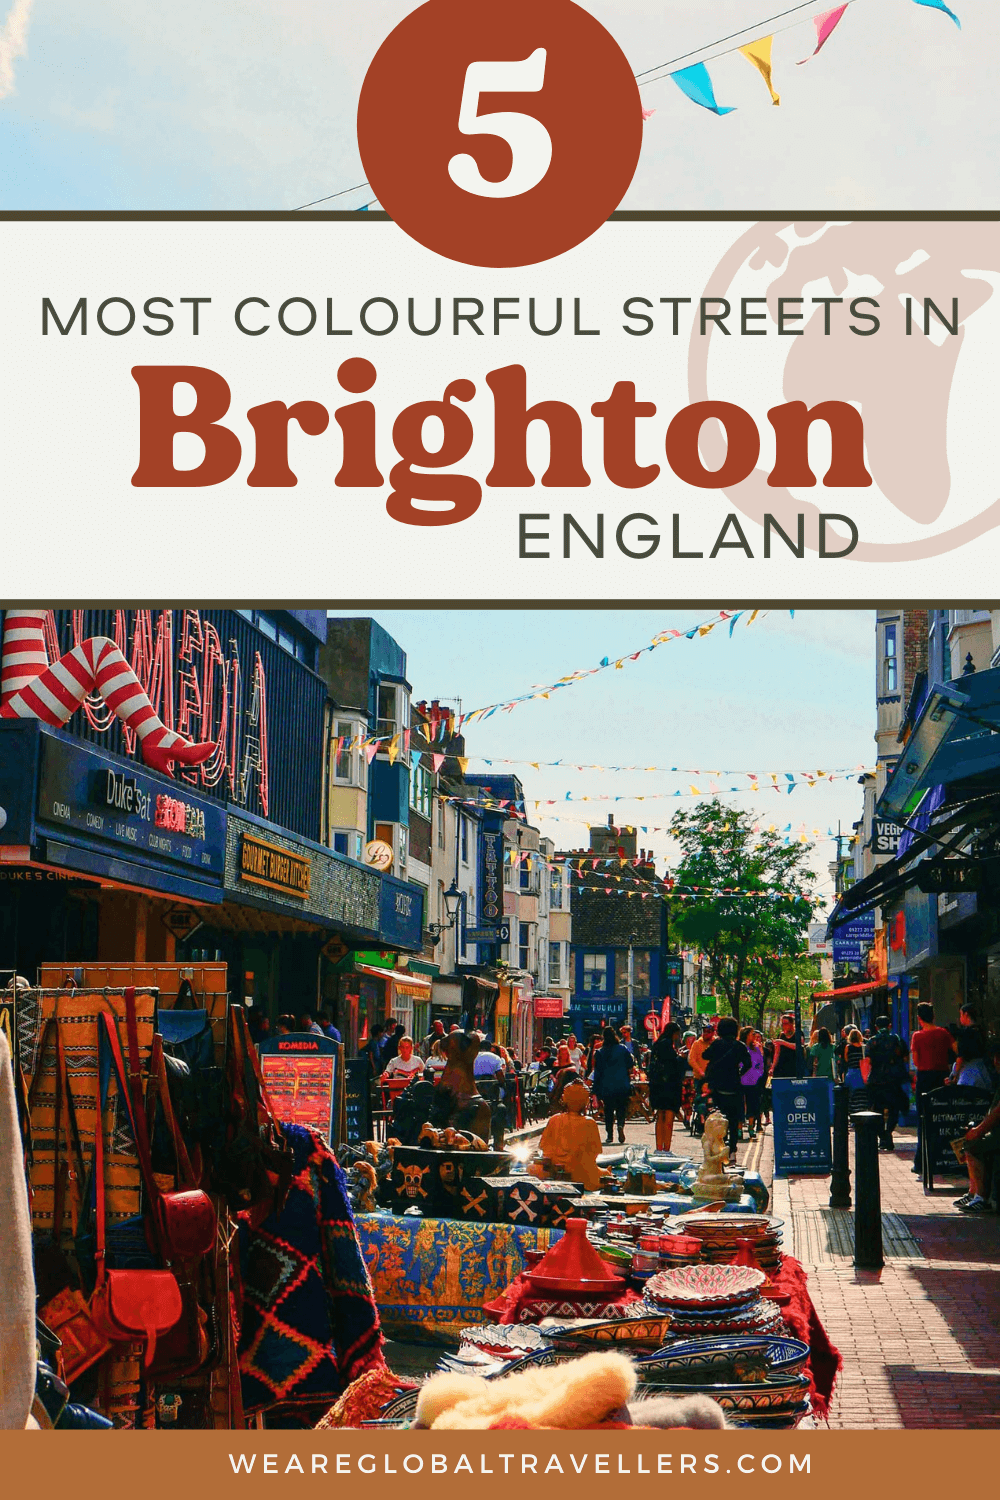 The most colourful streets in Brighton, England